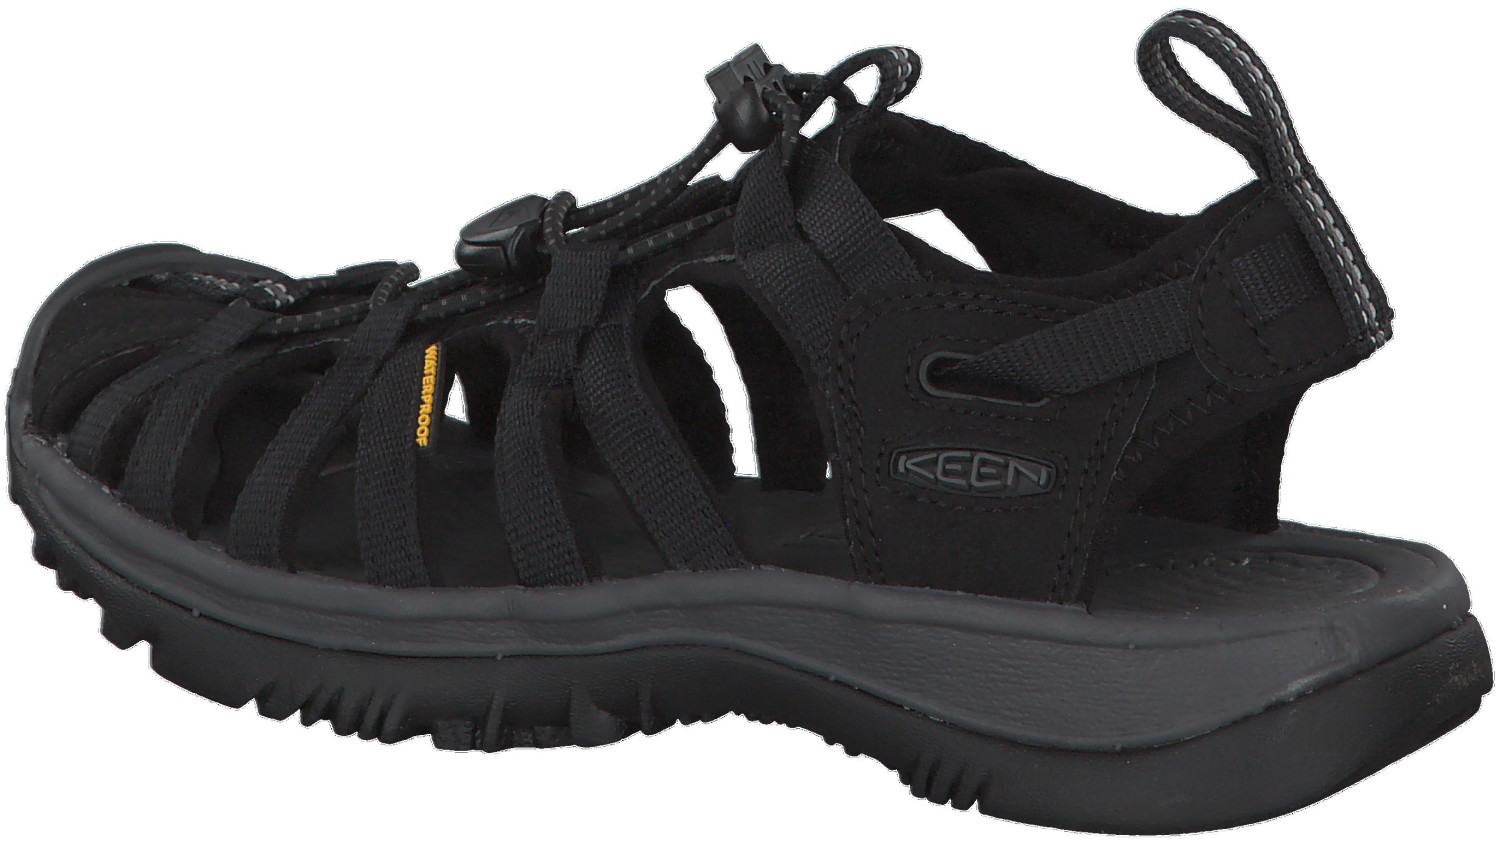 Buy Keen Whisper black (1018227) from £57.49 (Today) – Best Deals on ...